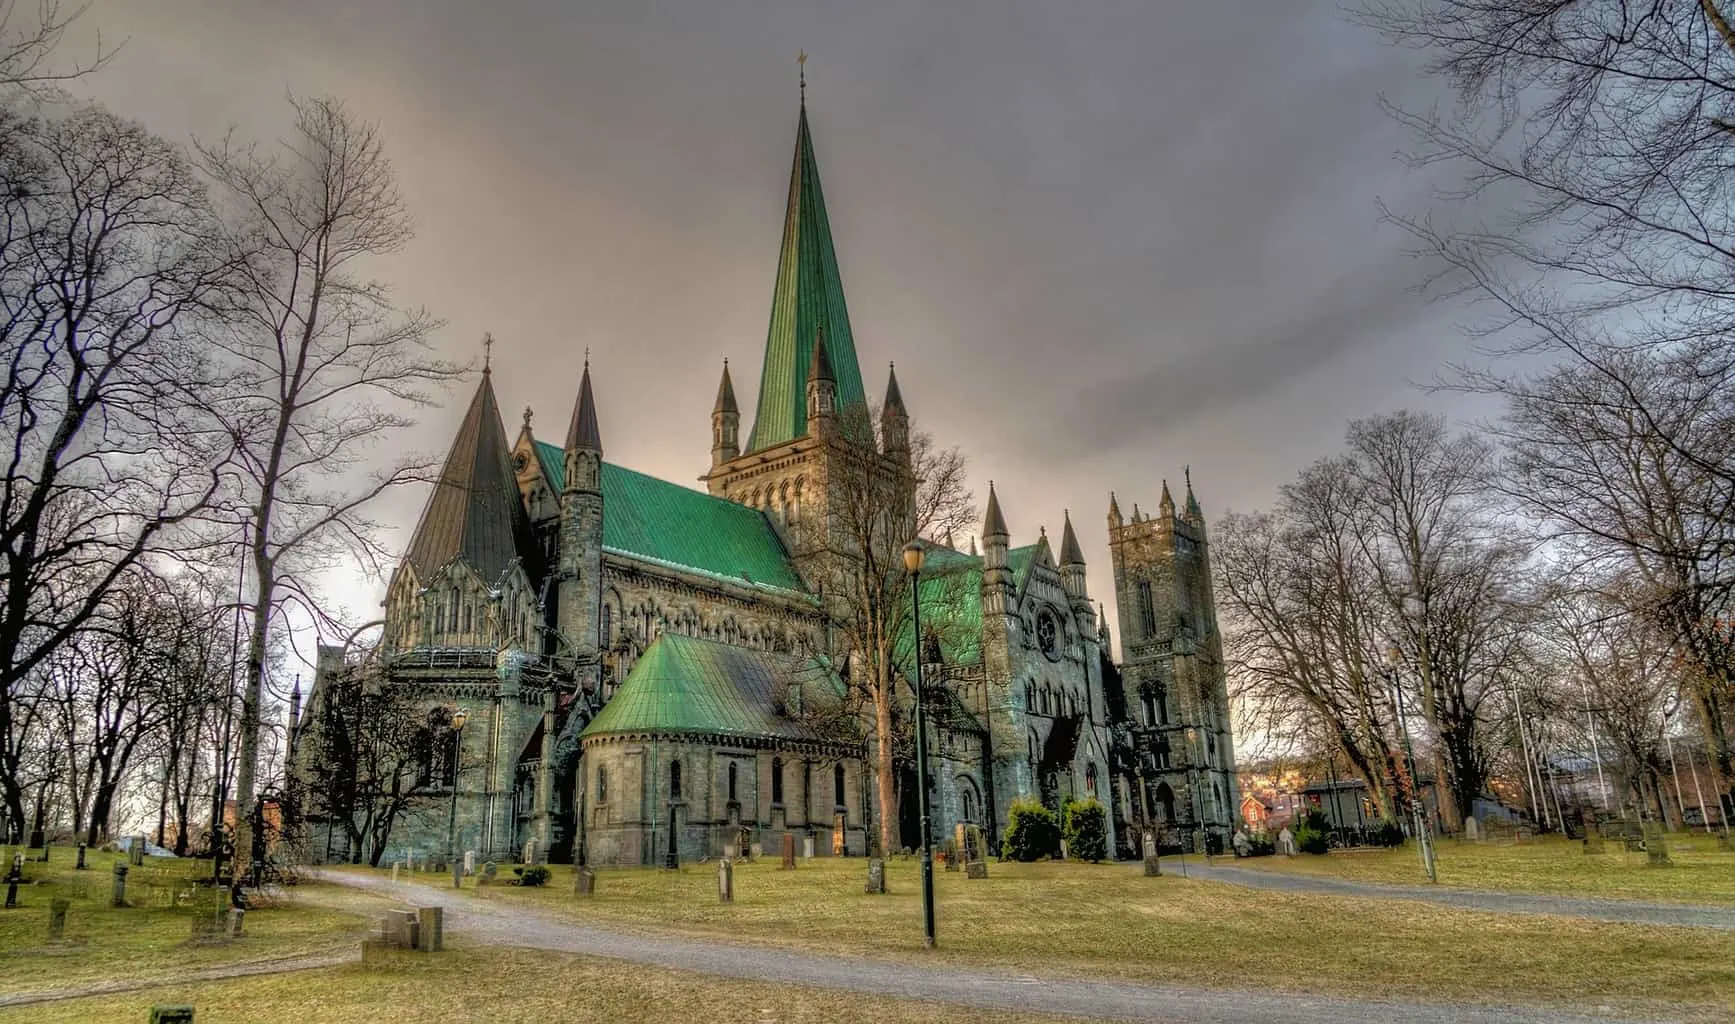 One of my fave Norway travel tips is to avoid the convenience stores and visit Nidaros Cathedral in Trondheim, Norway instead.